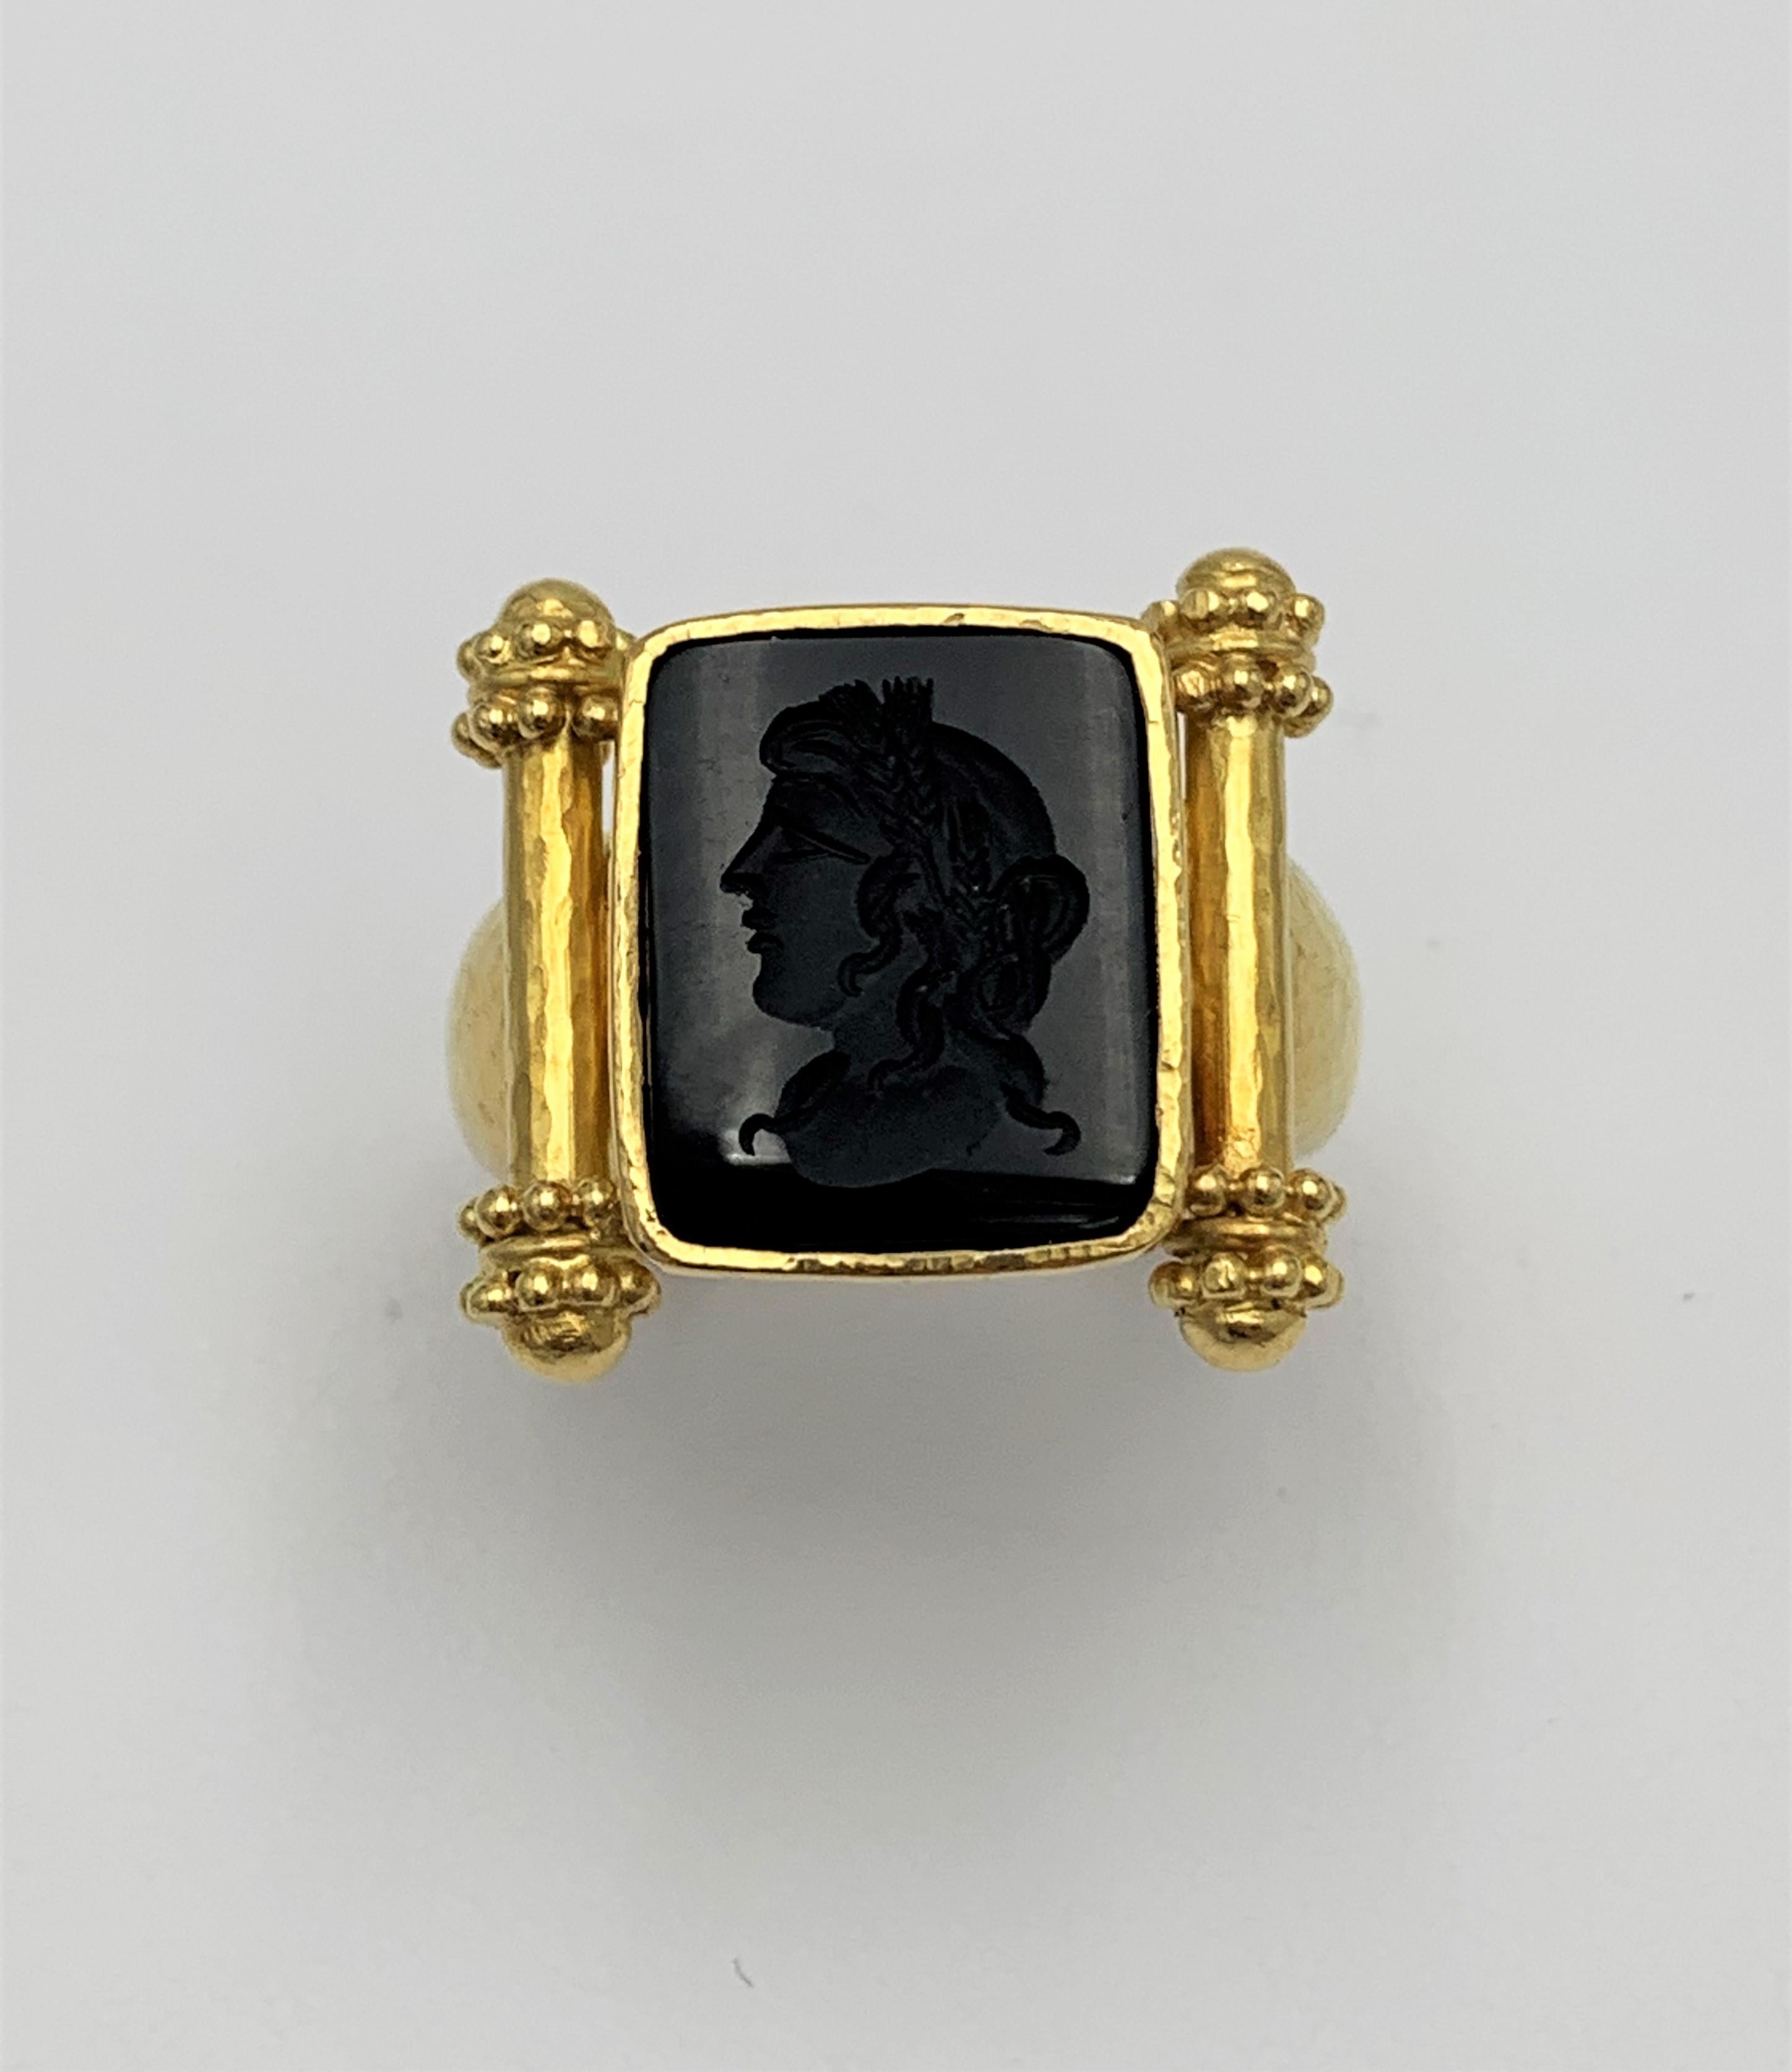 Authentic Elizabeth Locke ring crafted in 19 karat gold centers on an intaglio carved onyx stone. Ring size 10. Not presented with original box or papers. CIRCA 2010s.